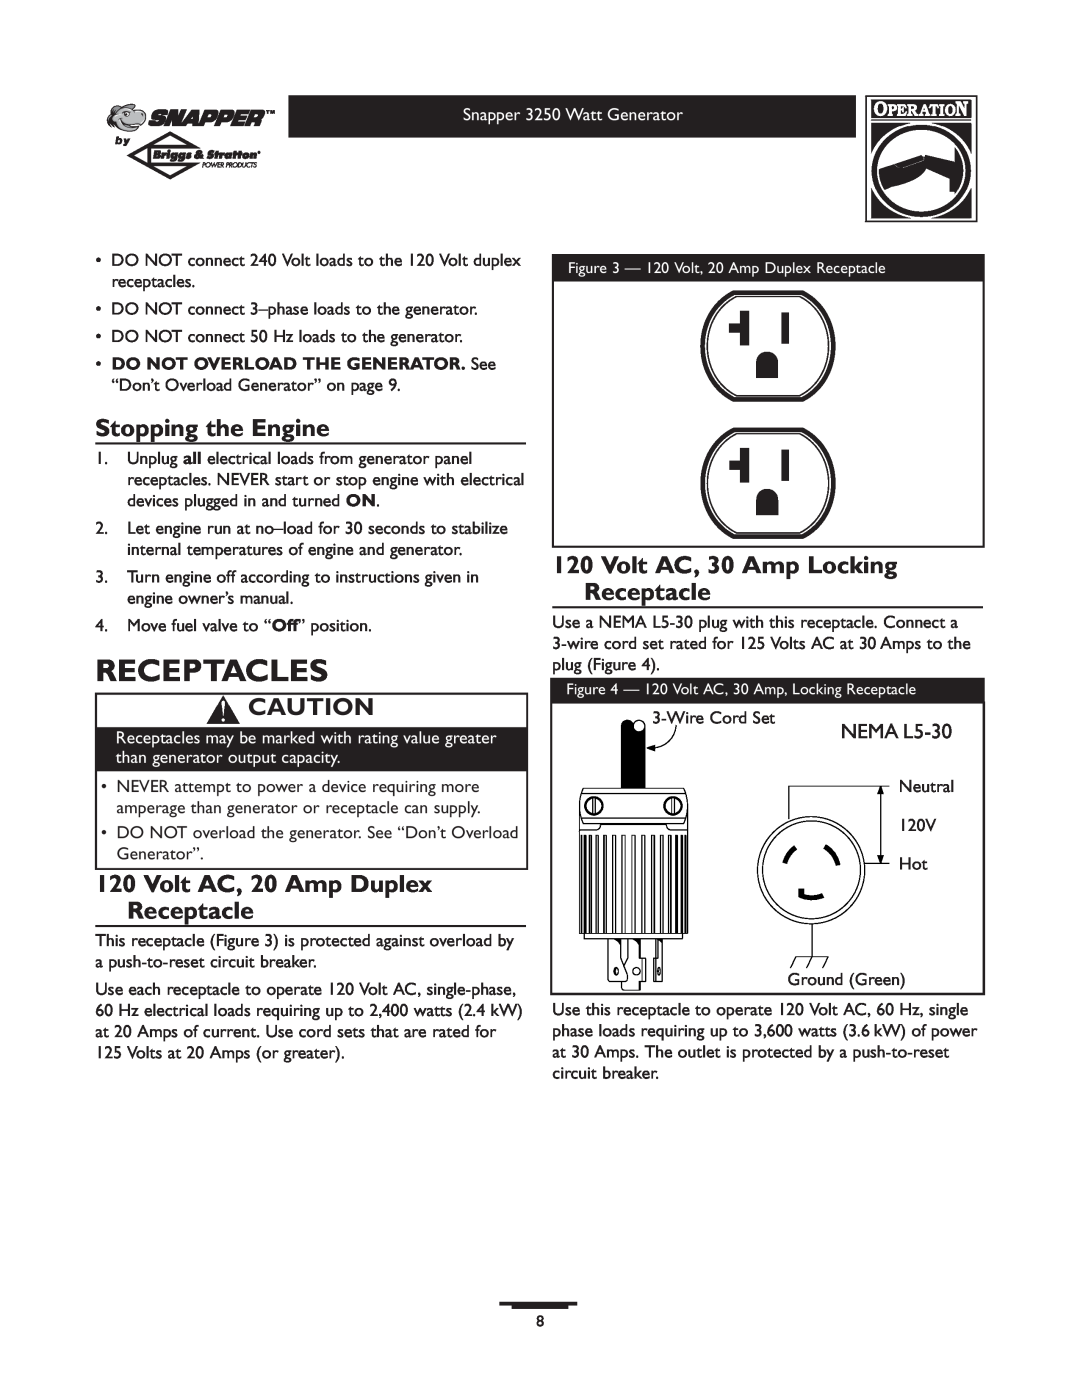 Snapper 3250 Receptacles, Stopping the Engine, Volt AC, 20 Amp Duplex Receptacle, Volt AC, 30 Amp Locking Receptacle 